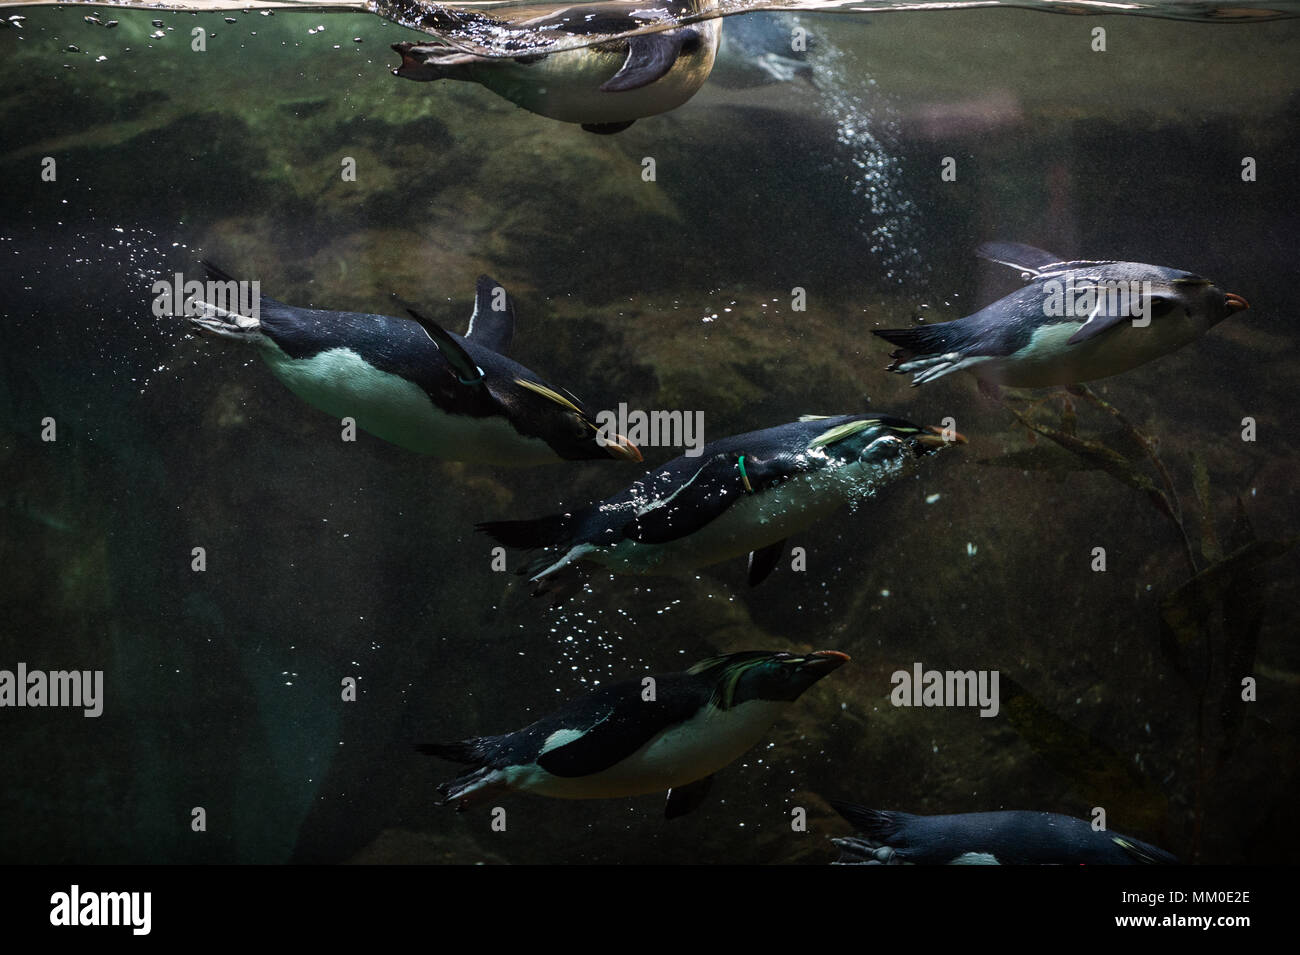 Northern rockhopper penguins are seen as they swim in their inclosure at Tiergarten Schoenbrunn Zoo in Vienna. The Tiergarten Schoenbrunn Zoo was founded in 1752, and it is the oldest operating zoo in the world. Stock Photo